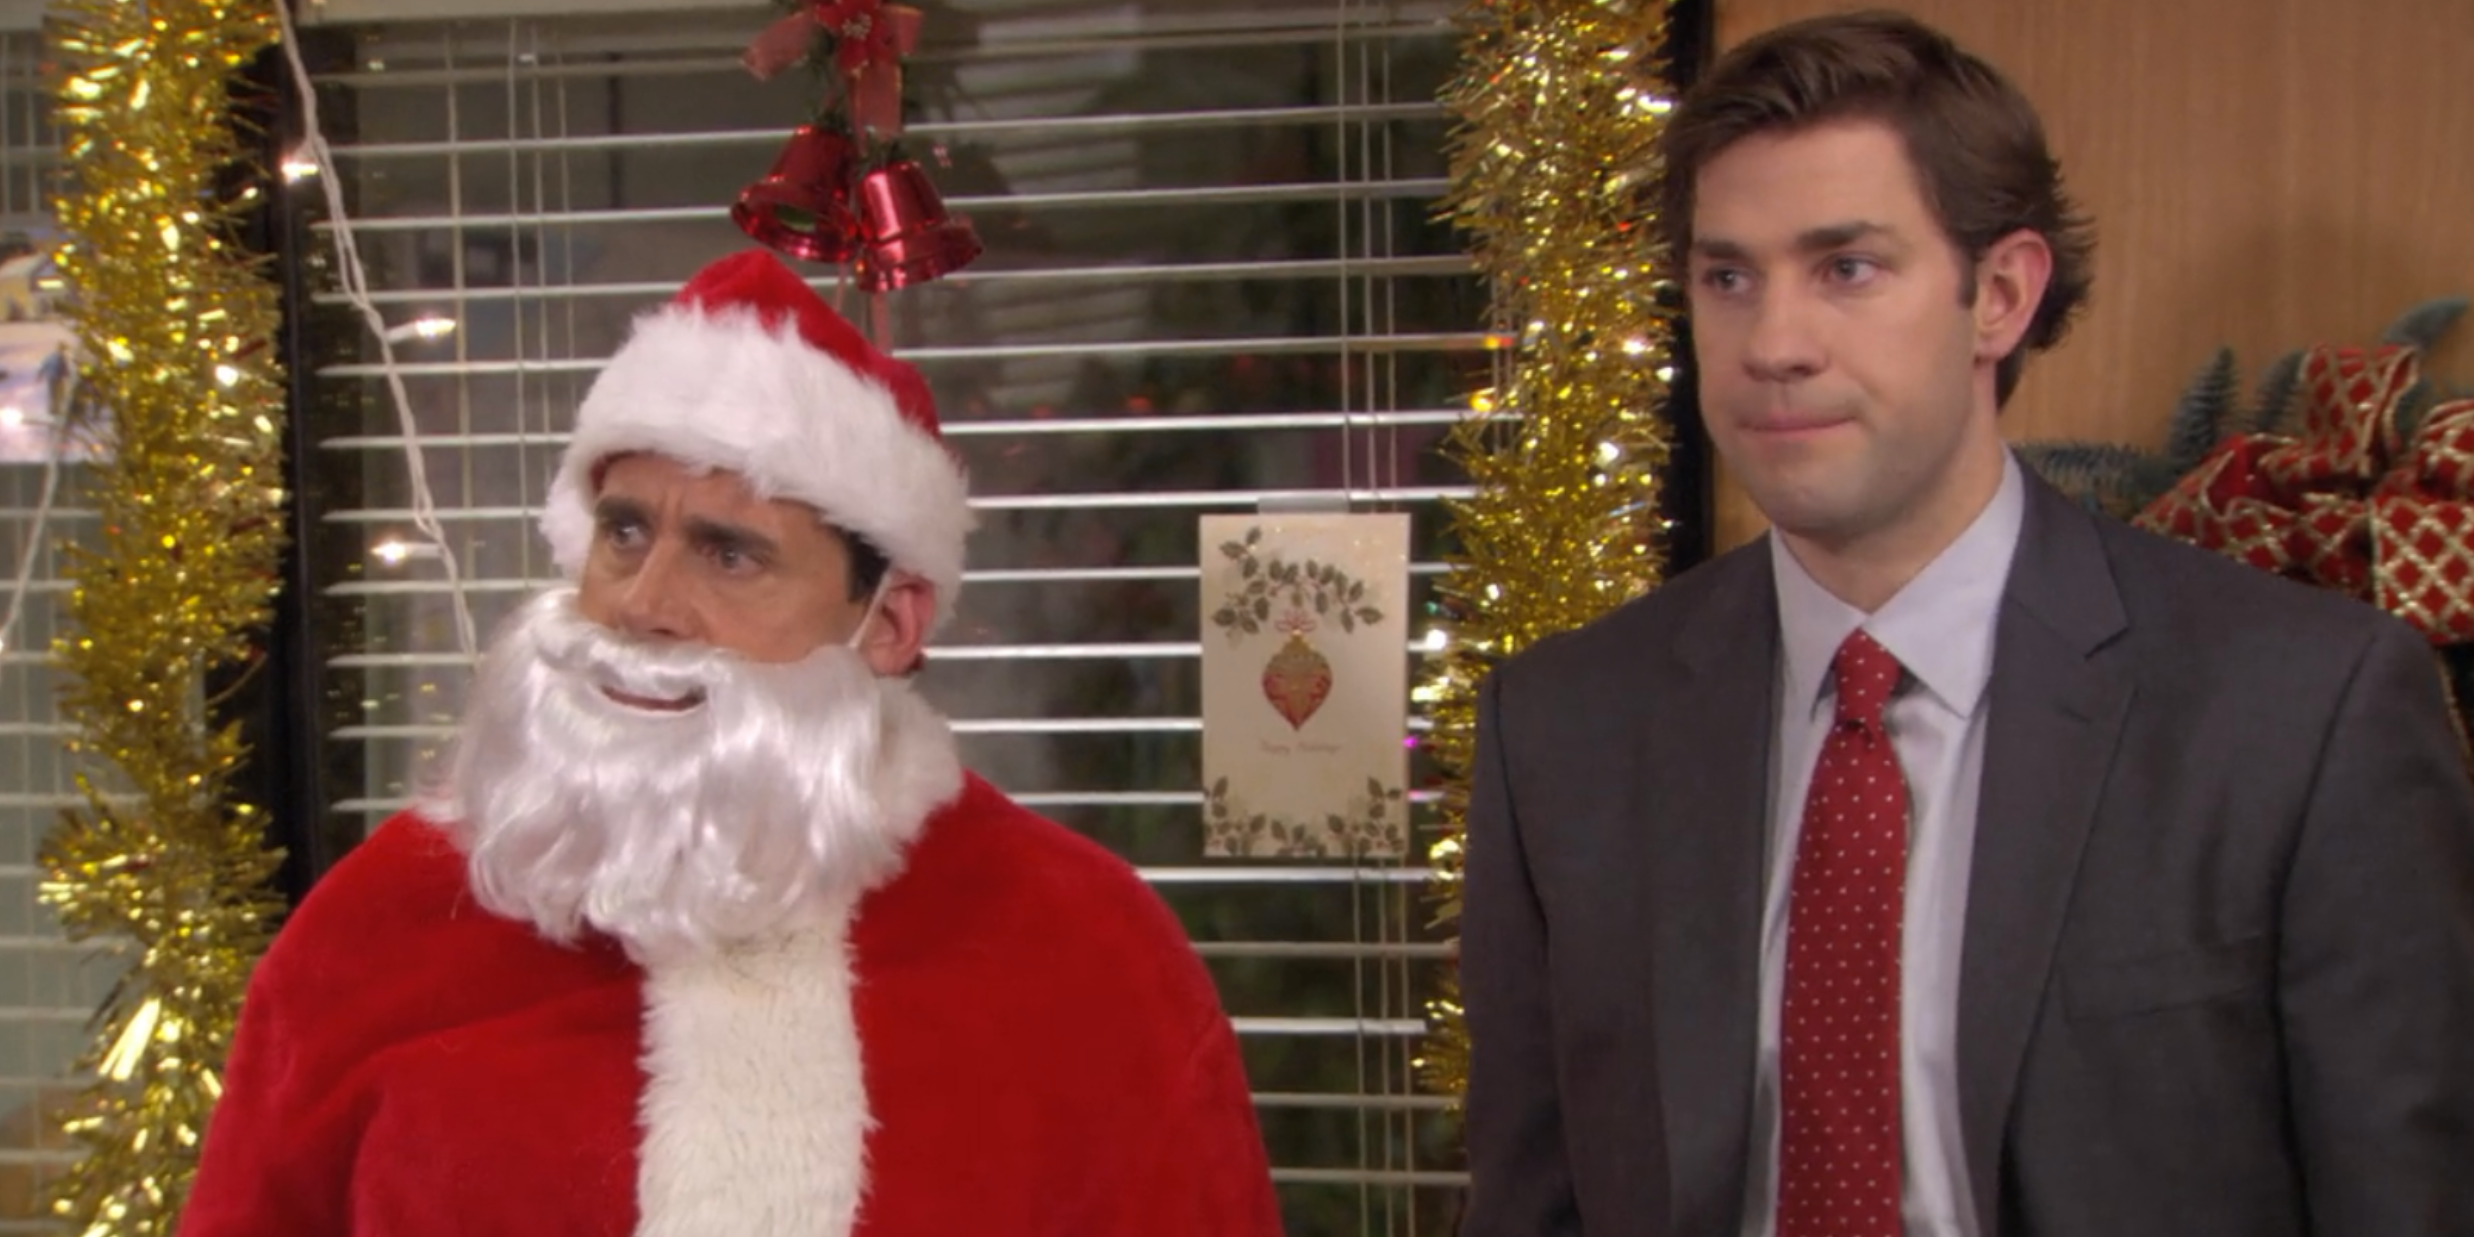 Michael is dressed as Santa while Jim stands next to him disapprovingly on The Office